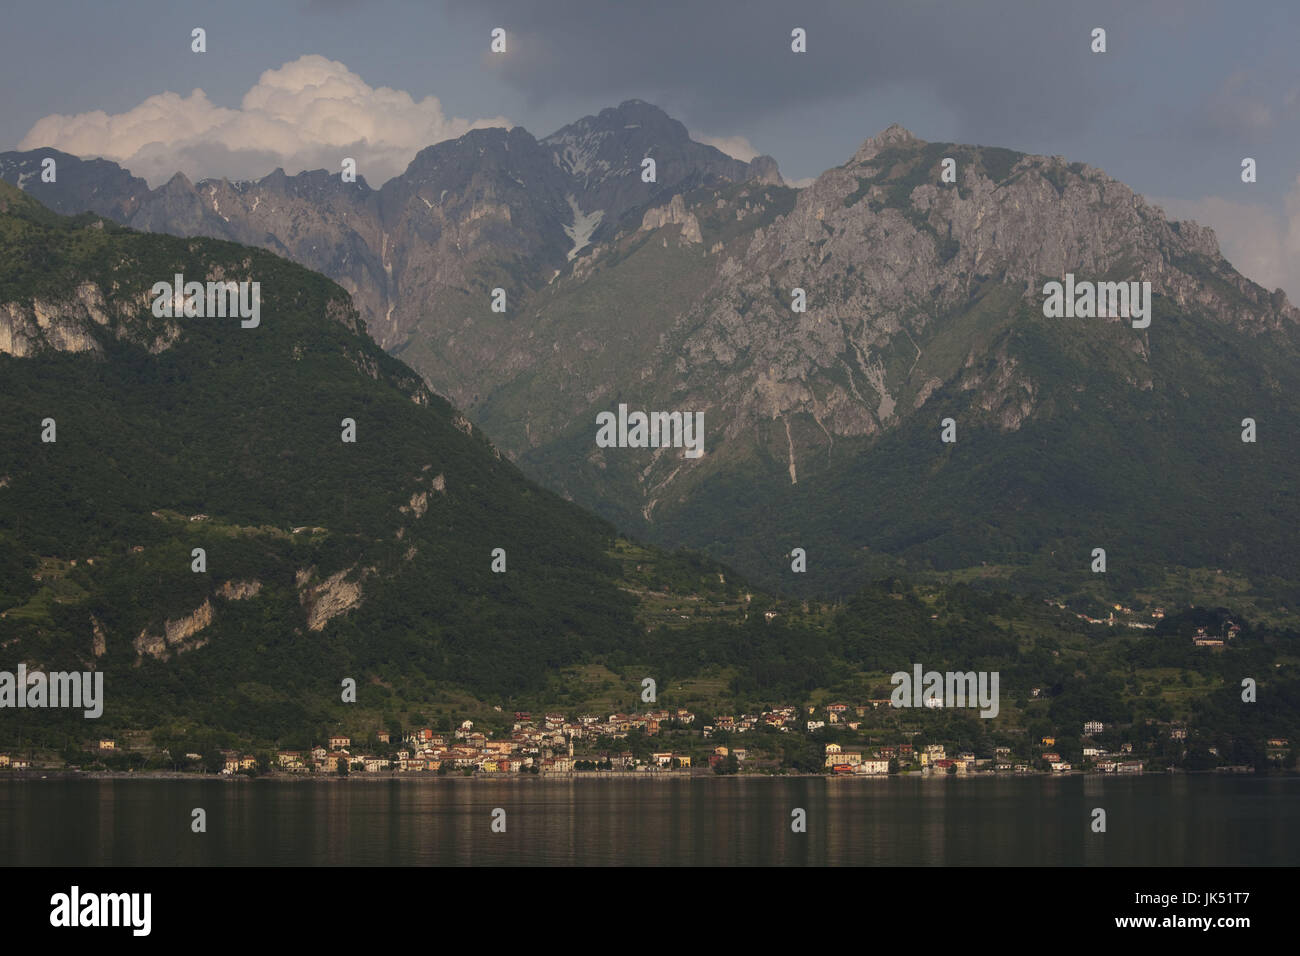 Italy, Lombardy, Lakes Region, Lake Como-Lake Lecco, Lierna, town and mountains of the Grigne Regional Park Stock Photo